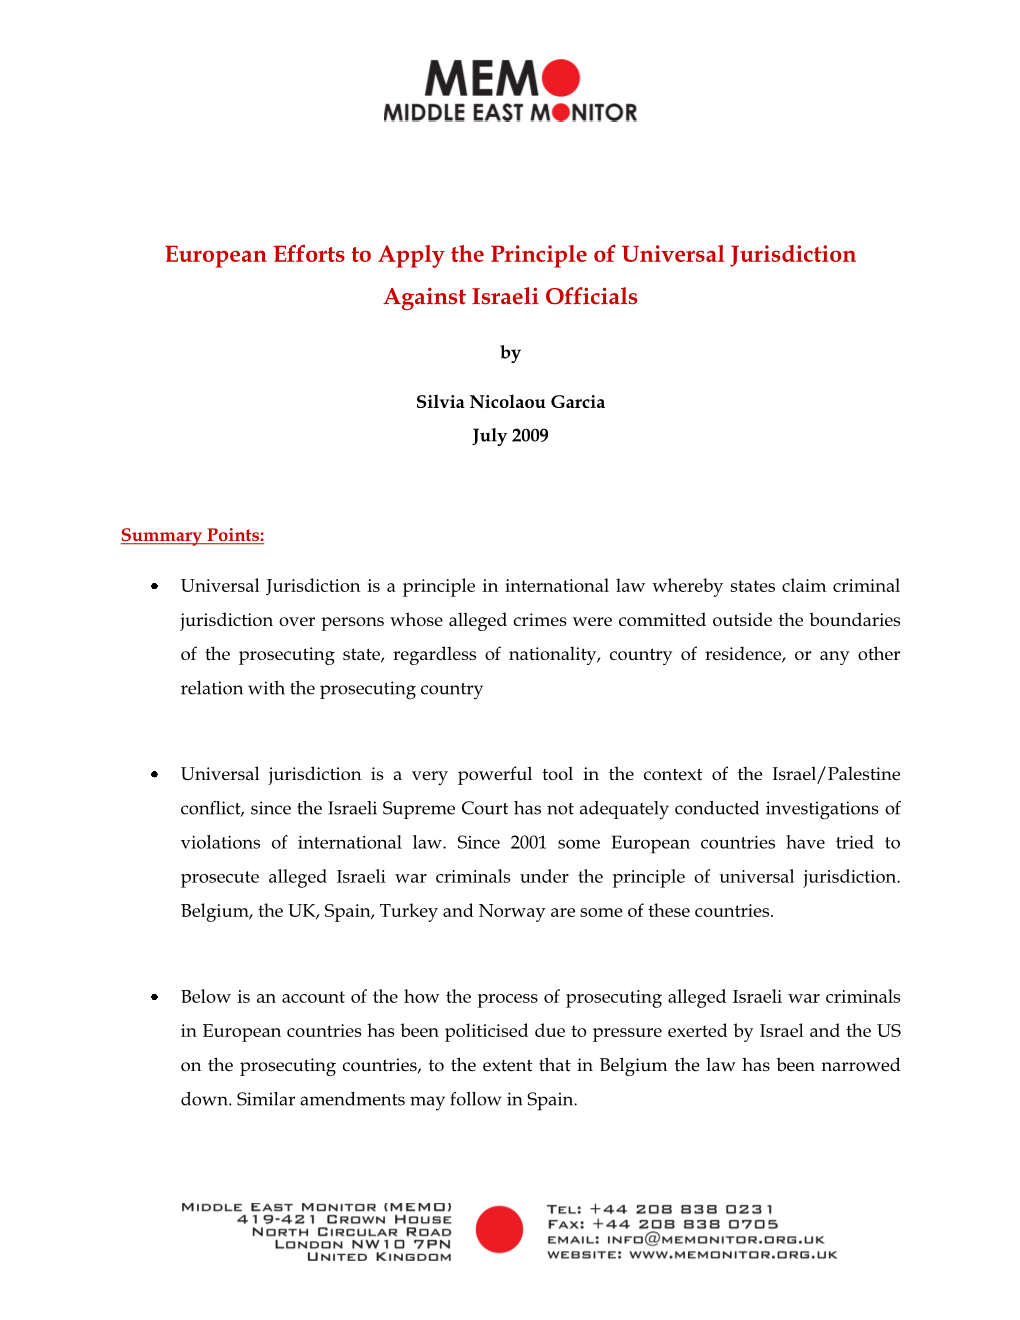 European Efforts to Apply the Principle of Universal Jurisdiction Against Israeli Officials